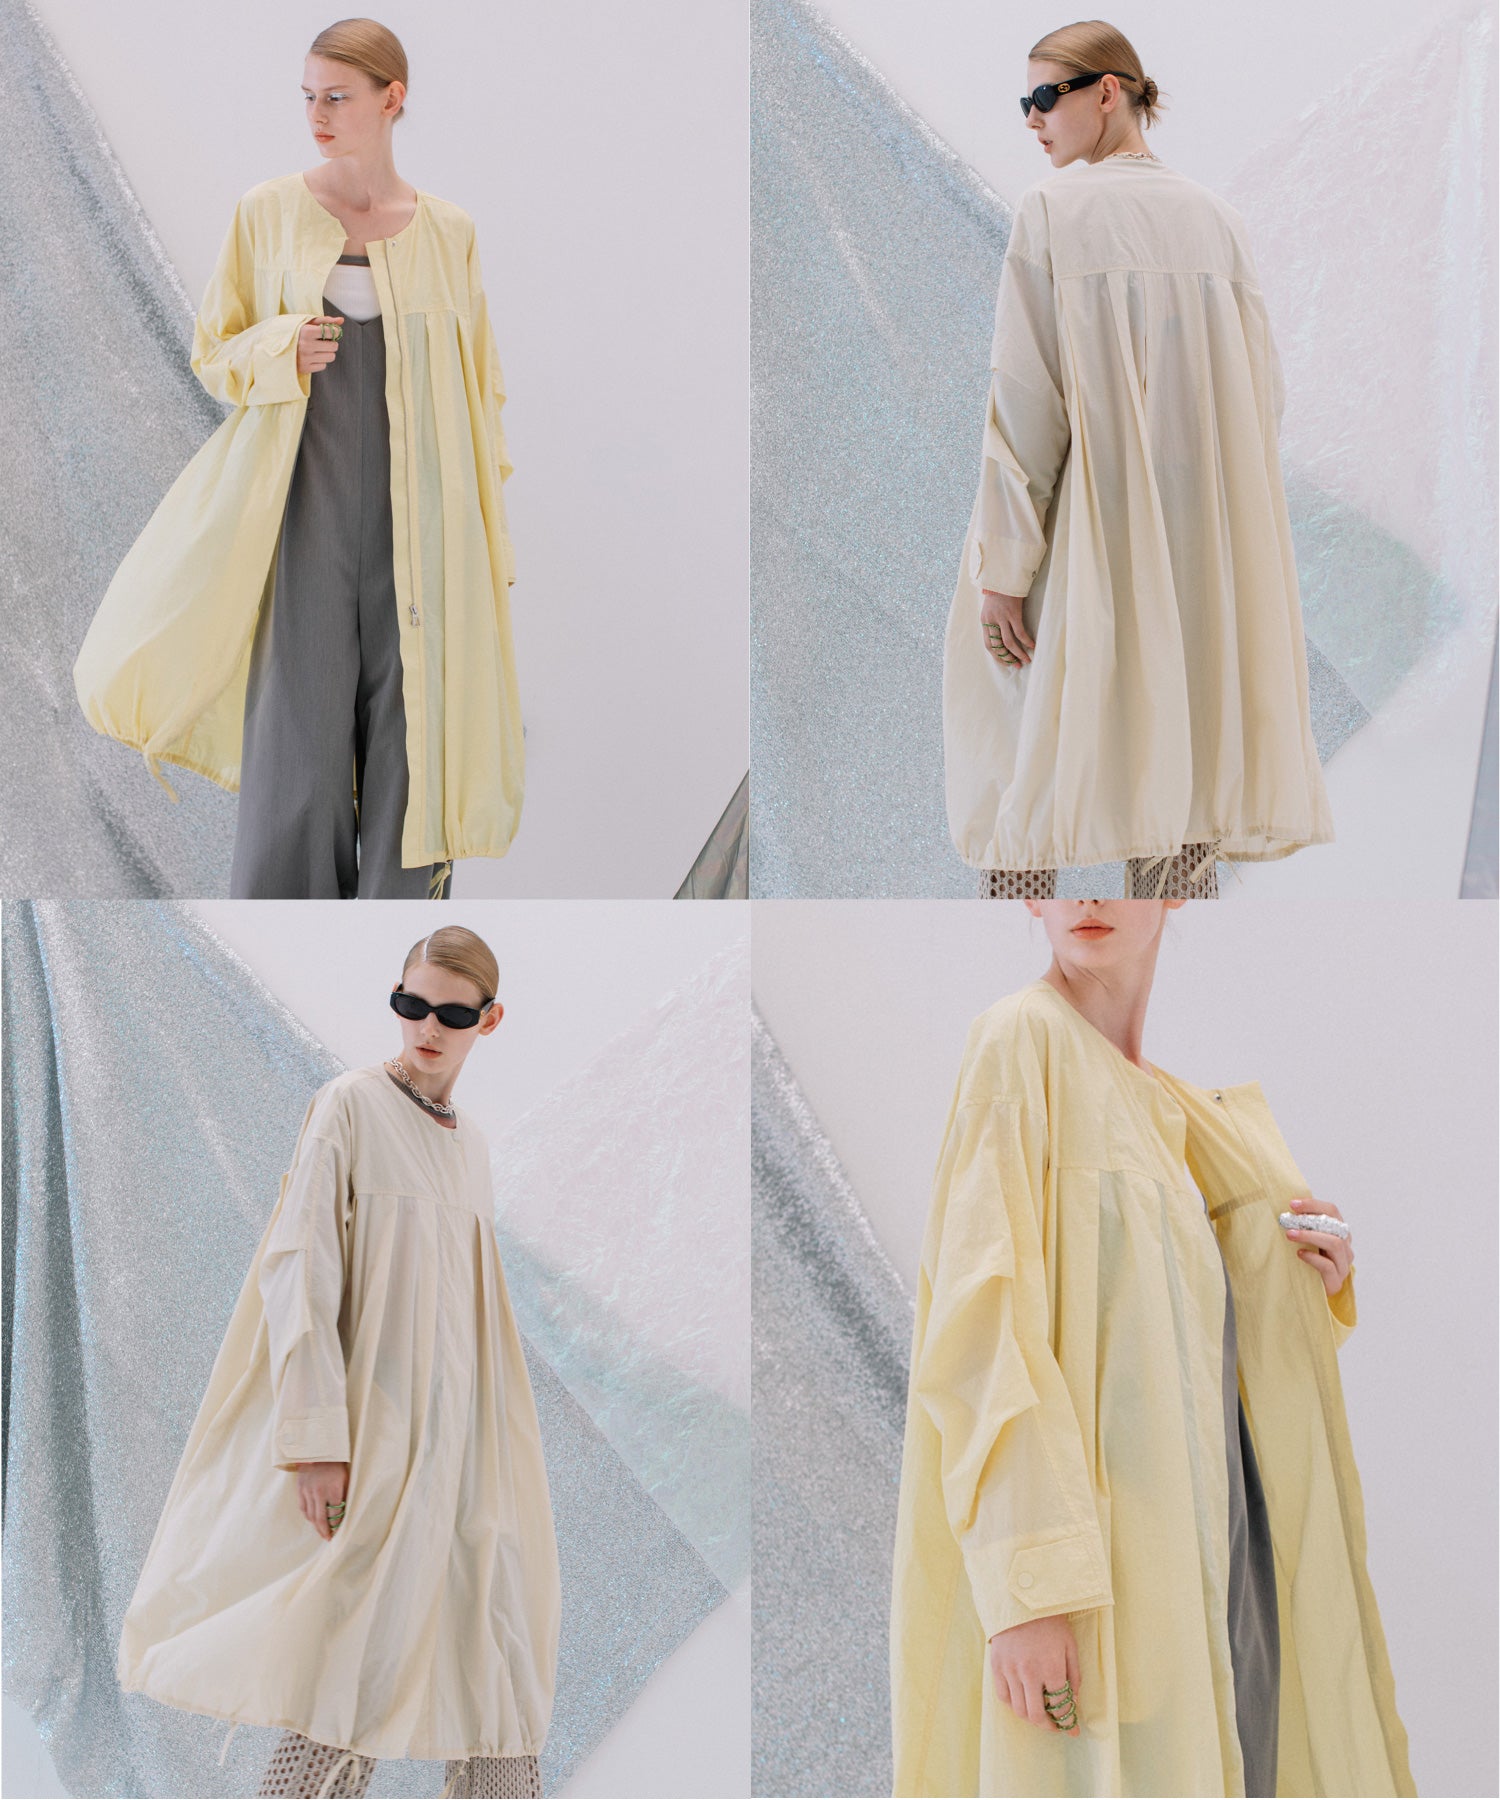 SPRING OUTER COLLECTION — aulaaila